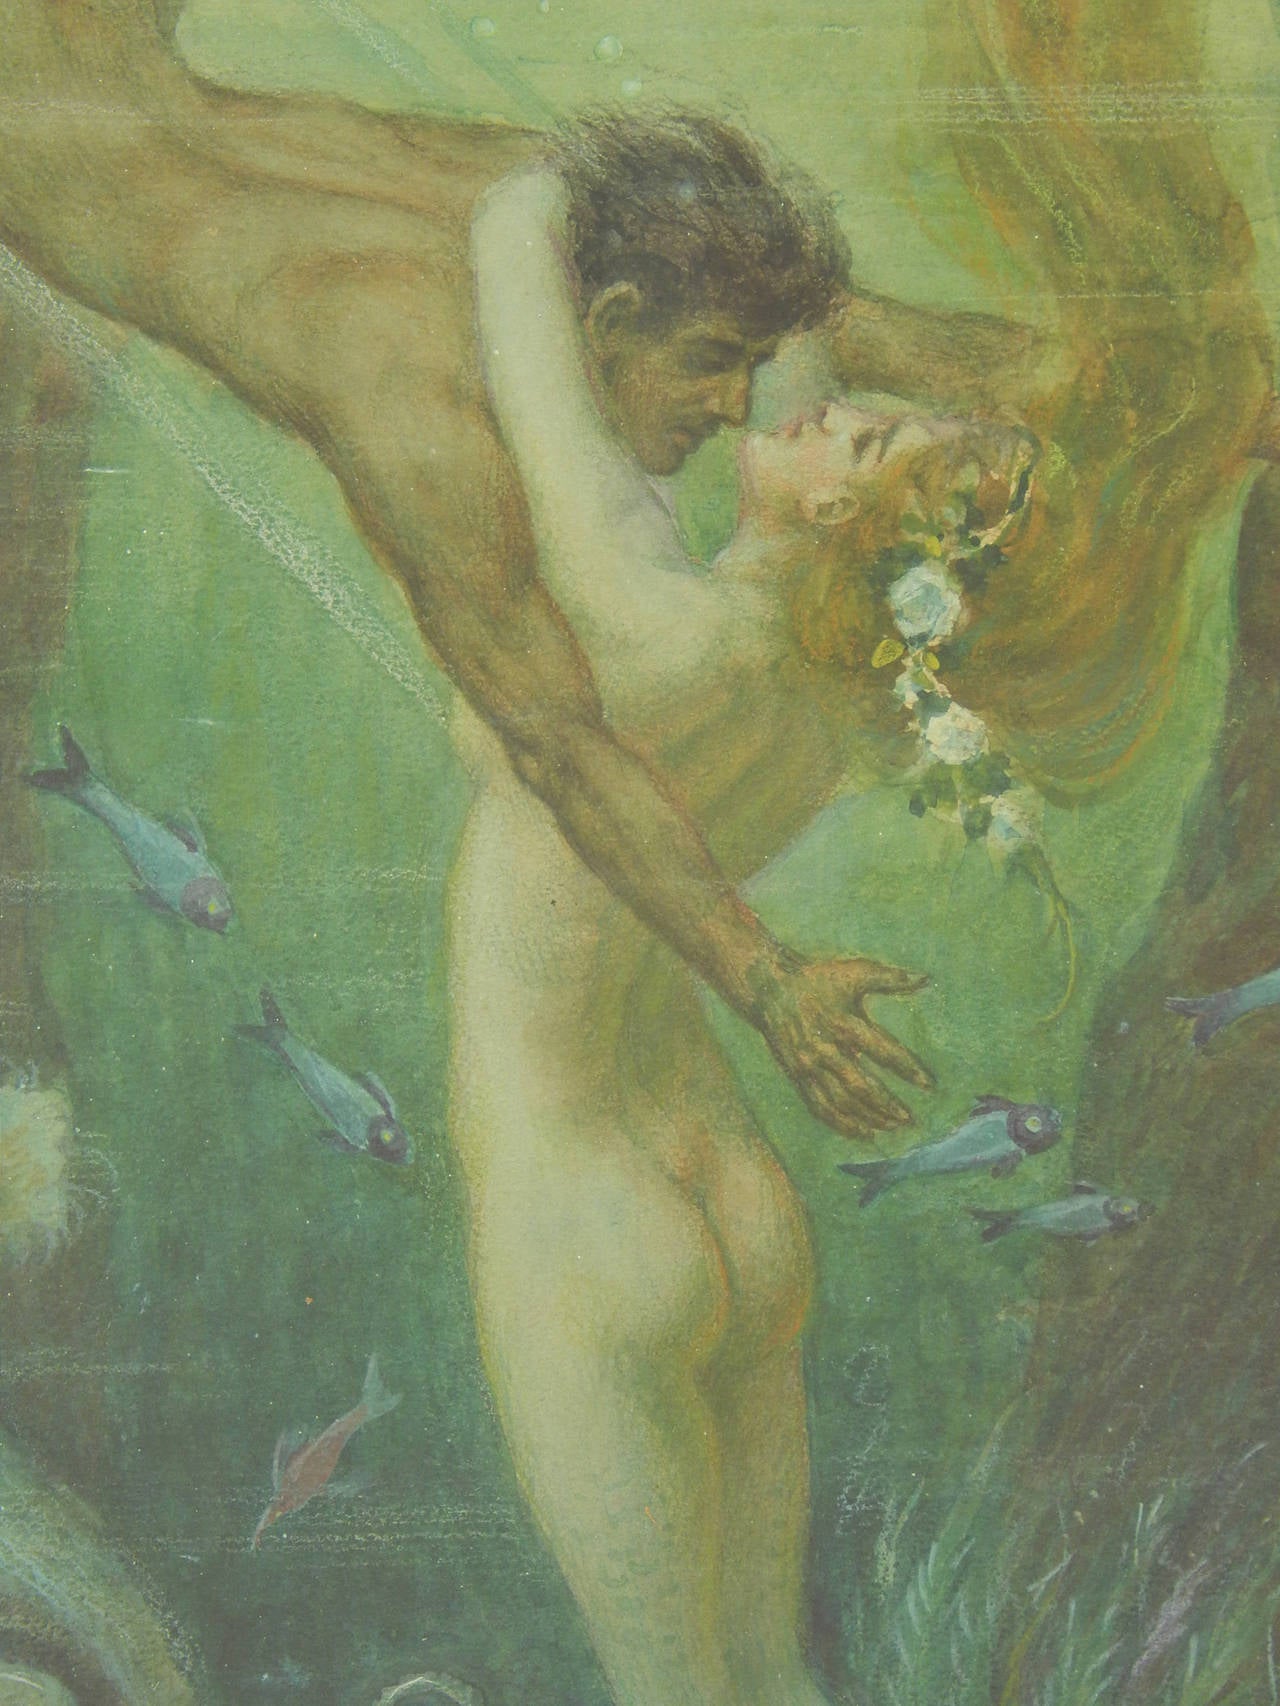 Infused with the gorgeous, translucent green hue of the deep ocean and imbued with a fantastical sensuality, this Art Deco masterpiece was painted by Ferenc Helbing, Hungary's master of exoticism and fantasy. Helbing had been a commercial artist of